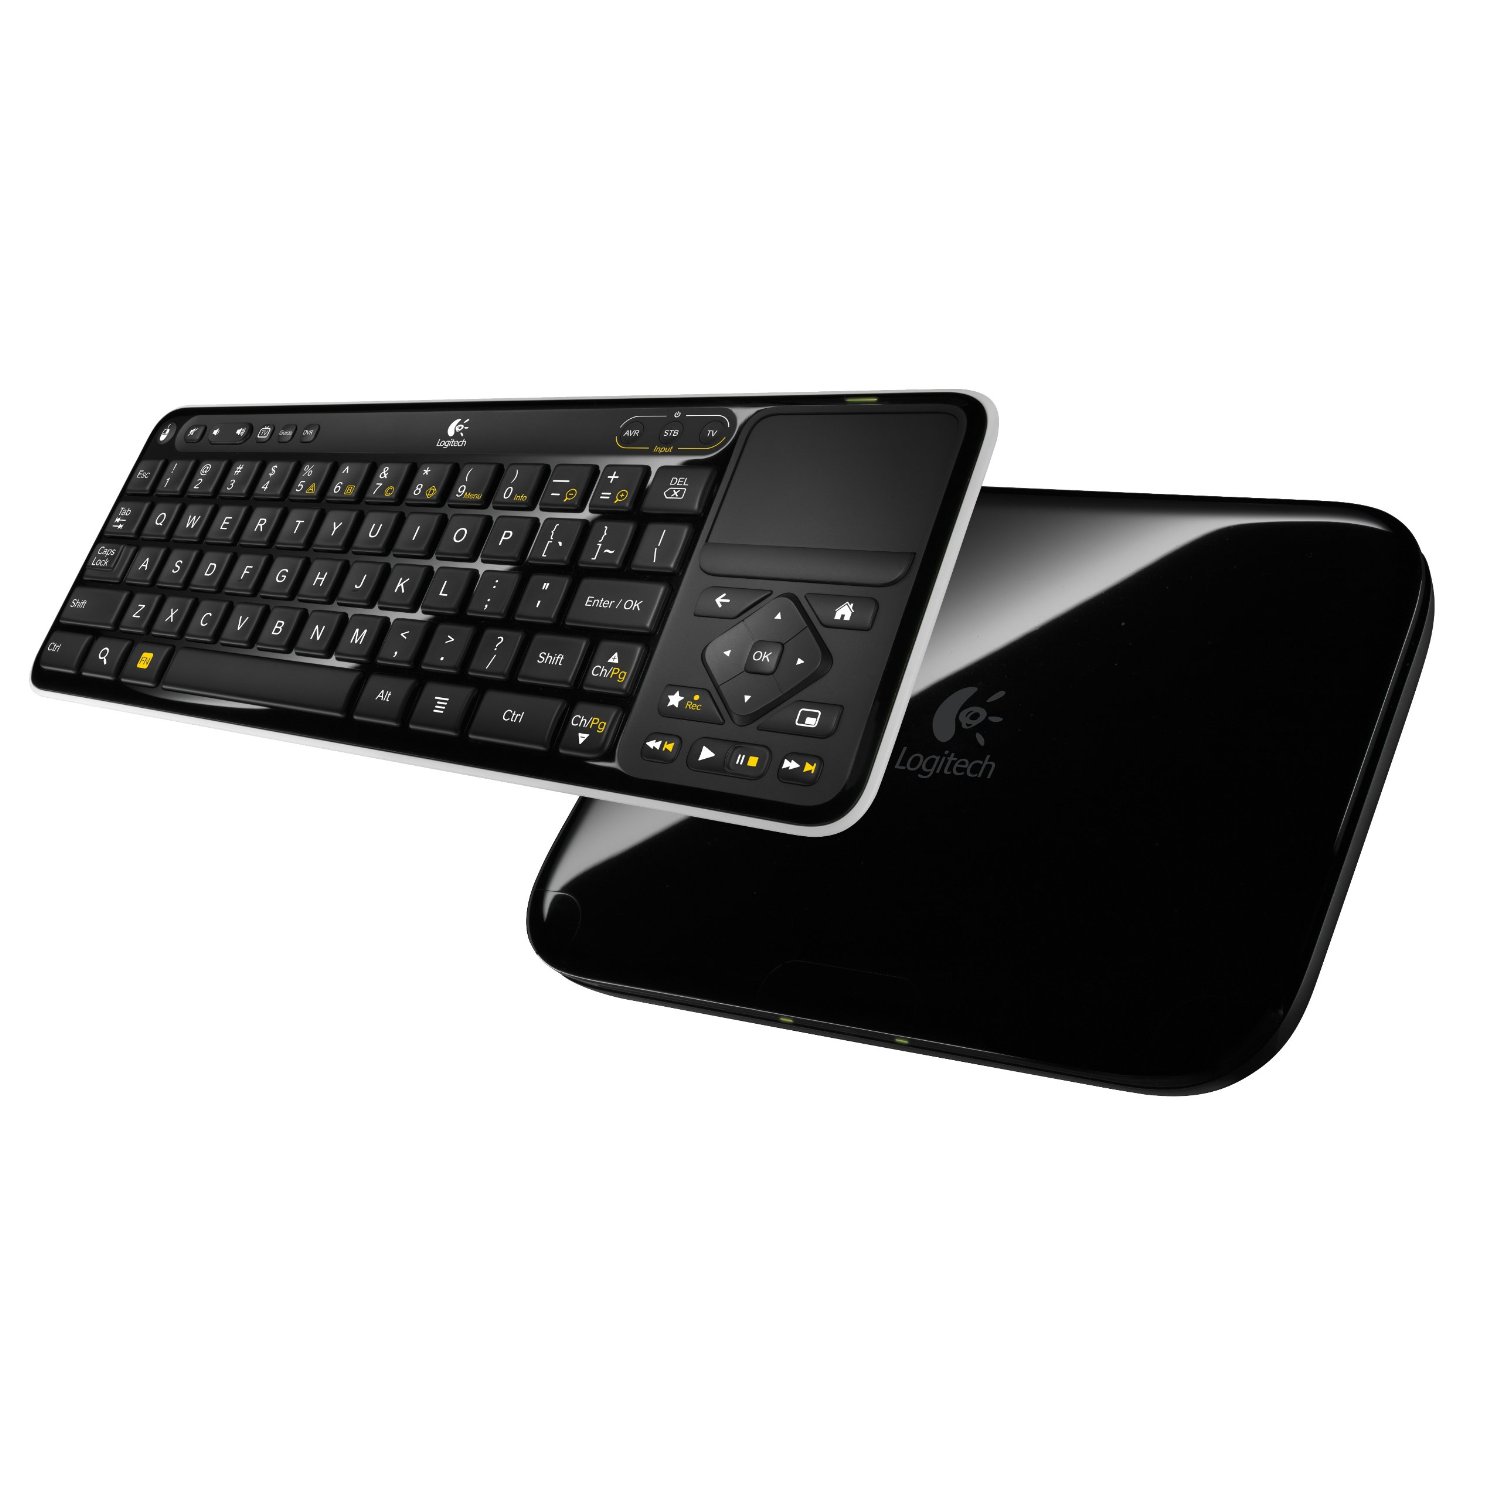 http://thetechjournal.com/wp-content/uploads/images/1109/1316496455-logitech-revue-companion-box-with-google-tv-and-keyboard-controller-38.jpg